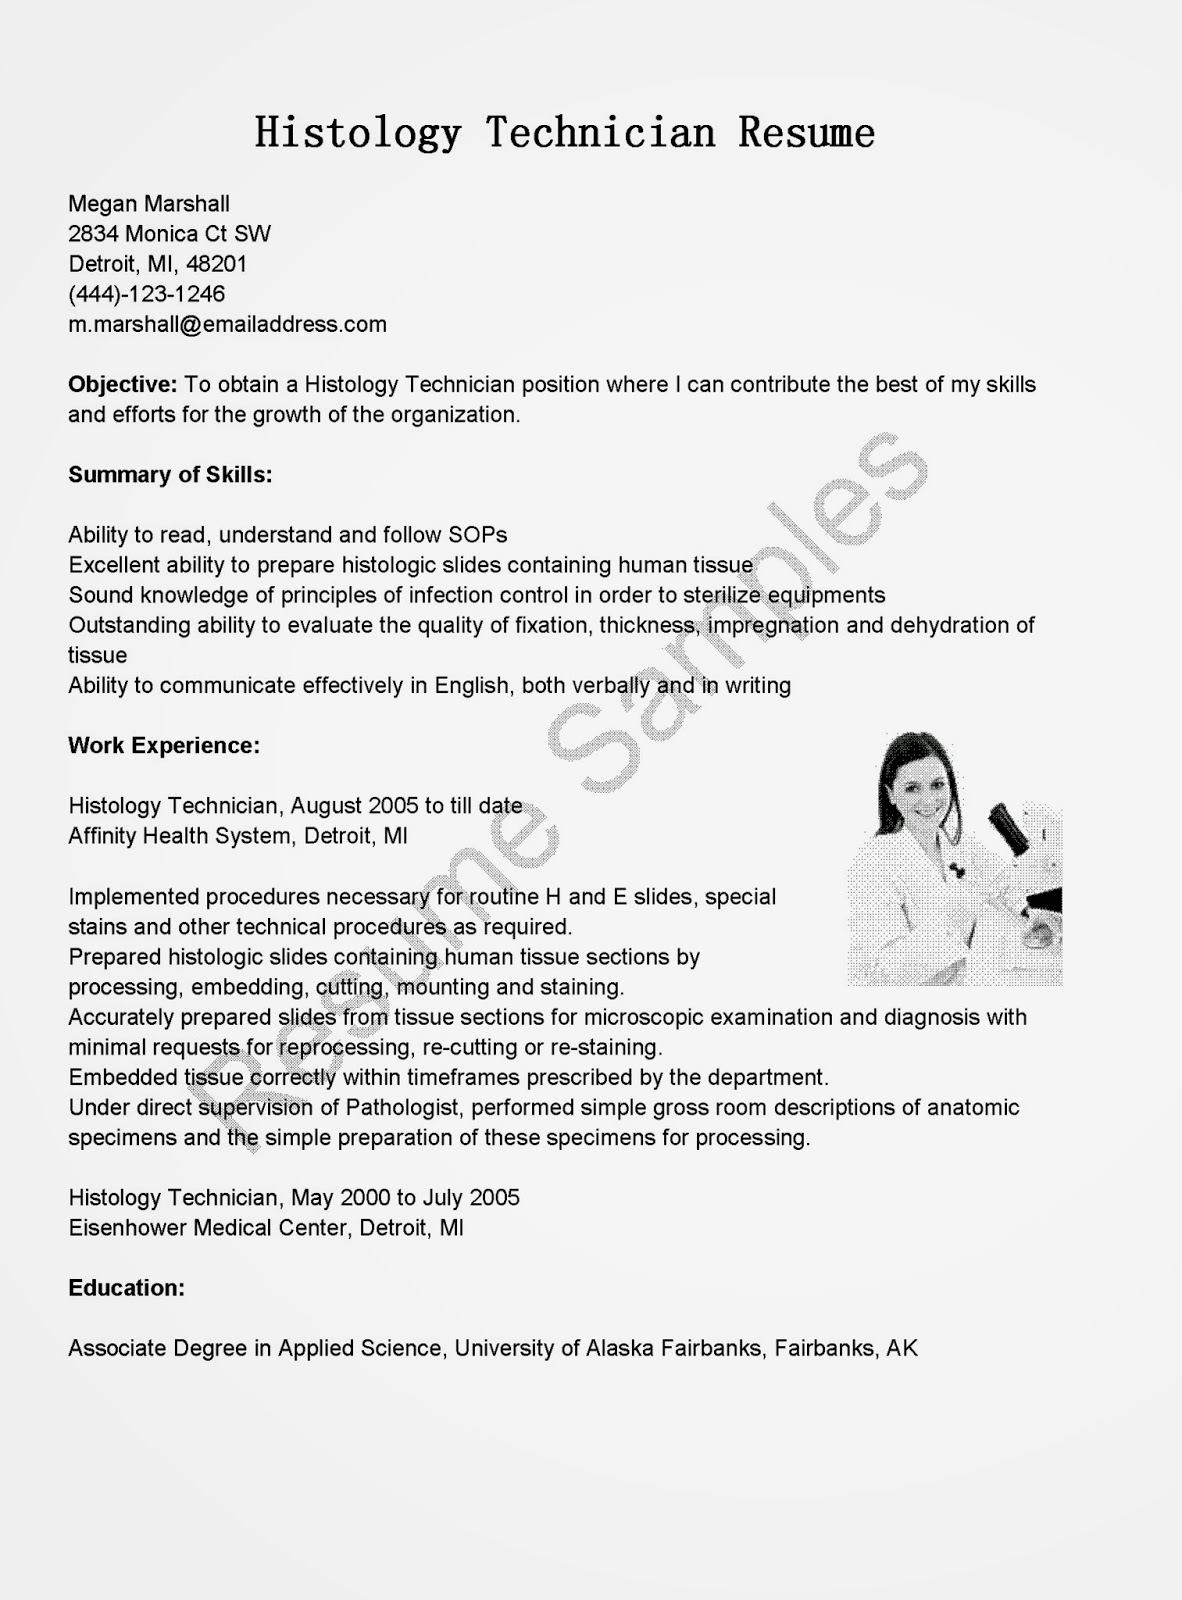 Computer assembly technician resume